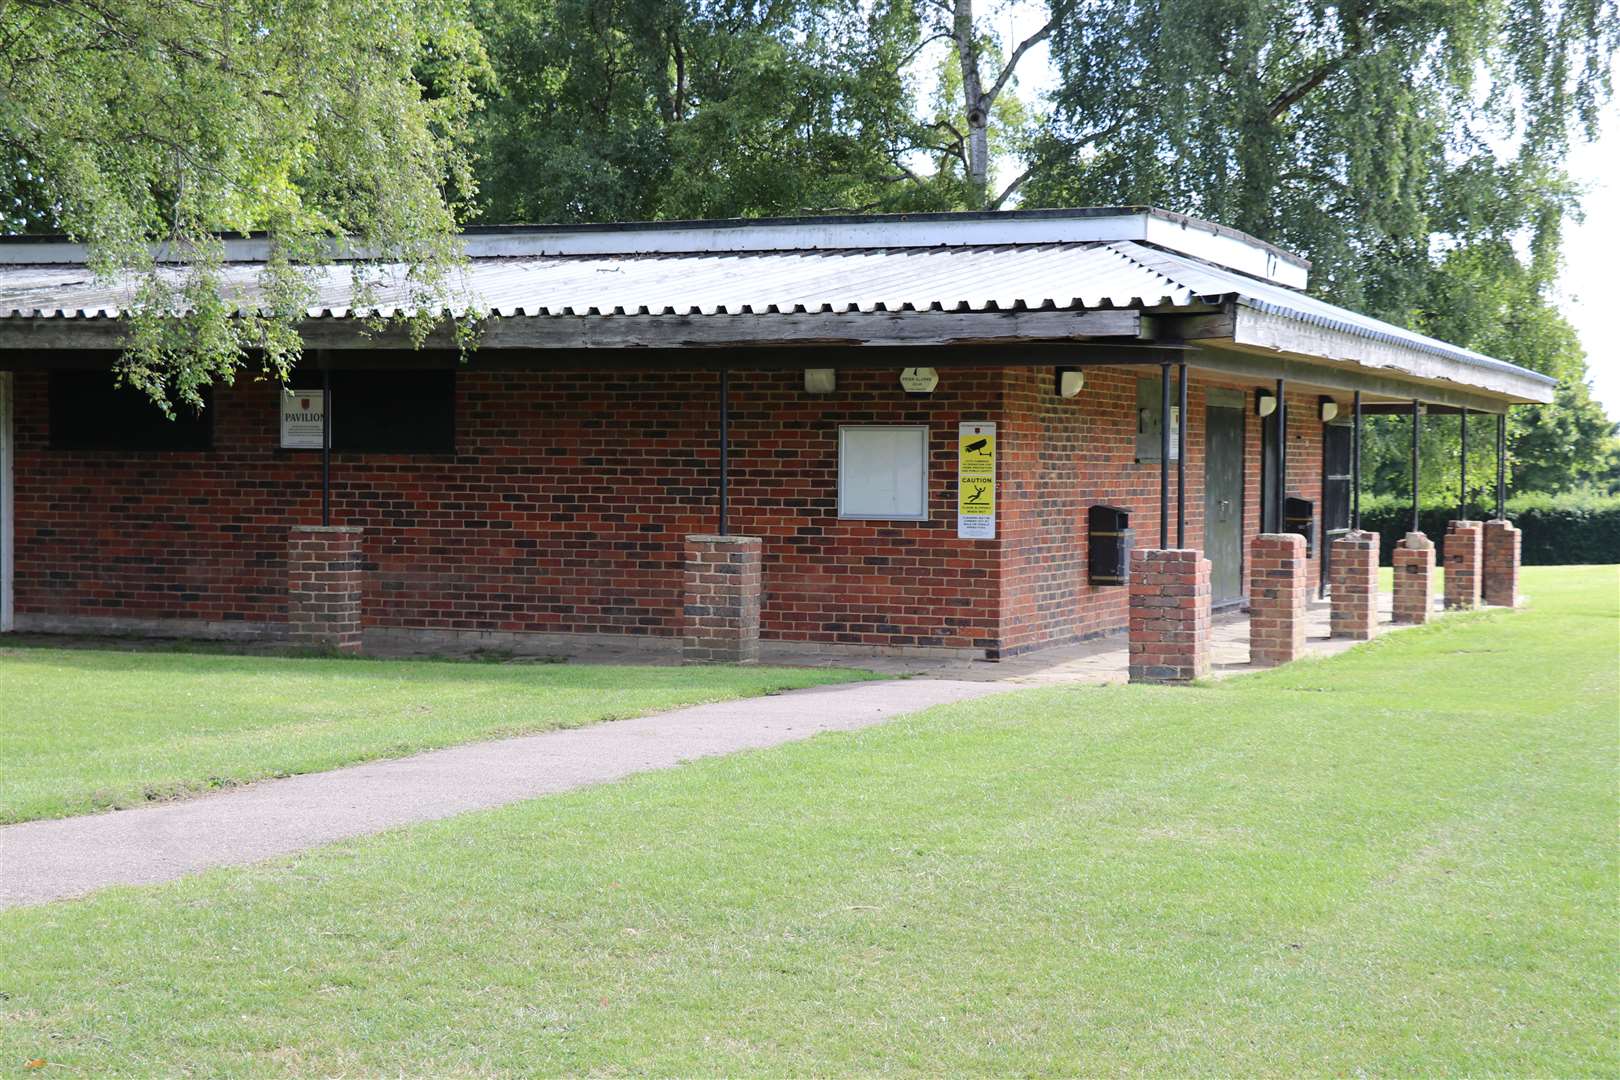 The attack happened near the pavilion at Tenterden recreation ground